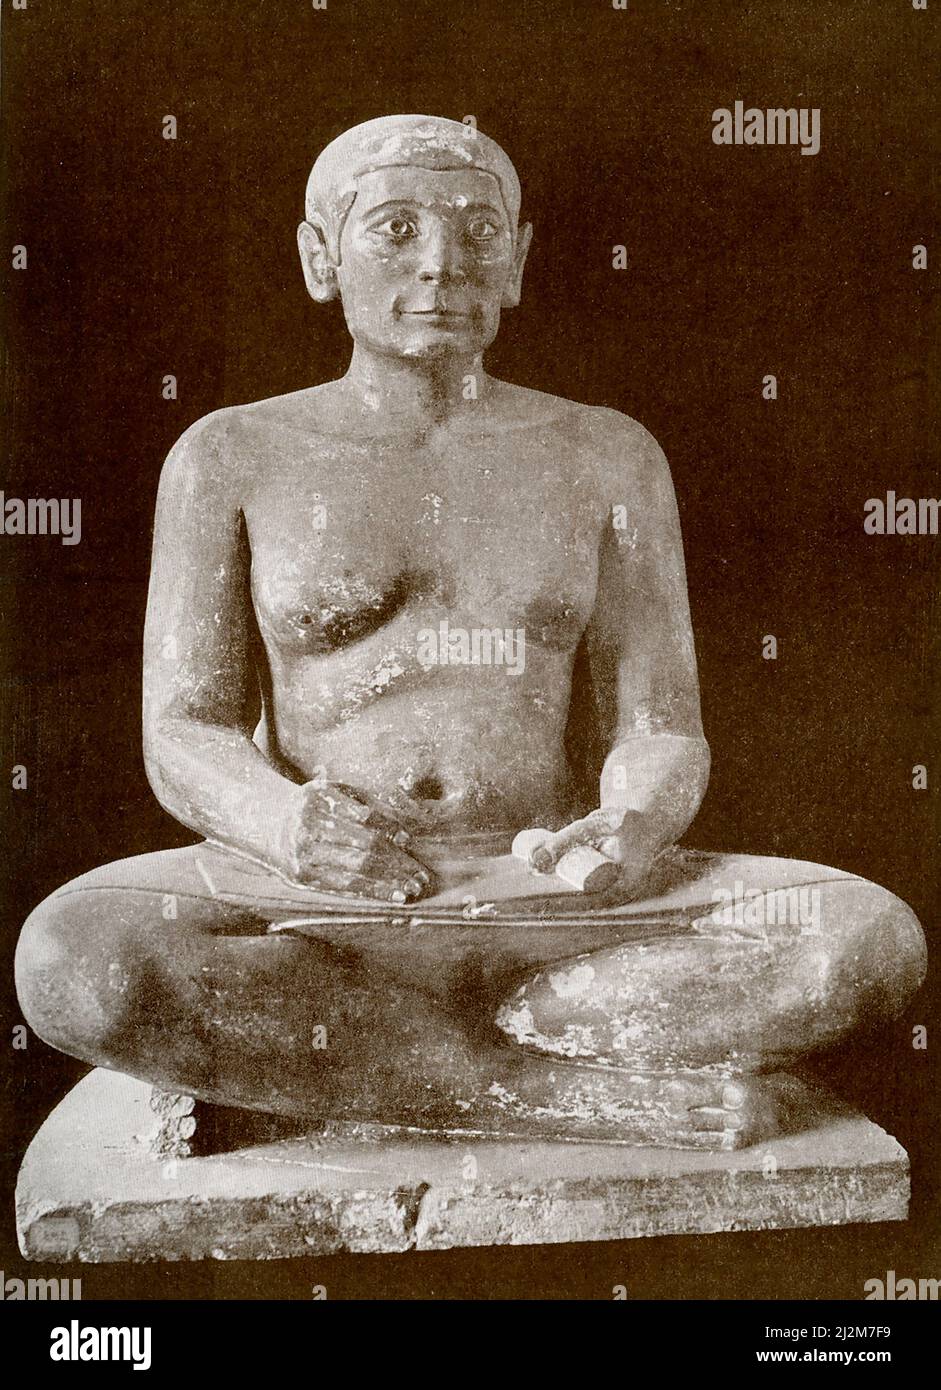 This limestone statue of a seated Egyptian scribe is housed in the Louvre Museum in Paris. The sculpture of the Seated Scribe or Squatting Scribe is a well-known piece of ancient Egyptian art. It represents a figure of a seated scribe at work. Discovered in 1850 at Saqqara, north of the alley of sphinxes leading to the Serapeum of Saqqara, it has been dated to the period of the Old Kingdom, from either the 5th Dynasty, c. 2450–2325 BC or the 4th Dynasty, 2620–2500 BC. Stock Photo